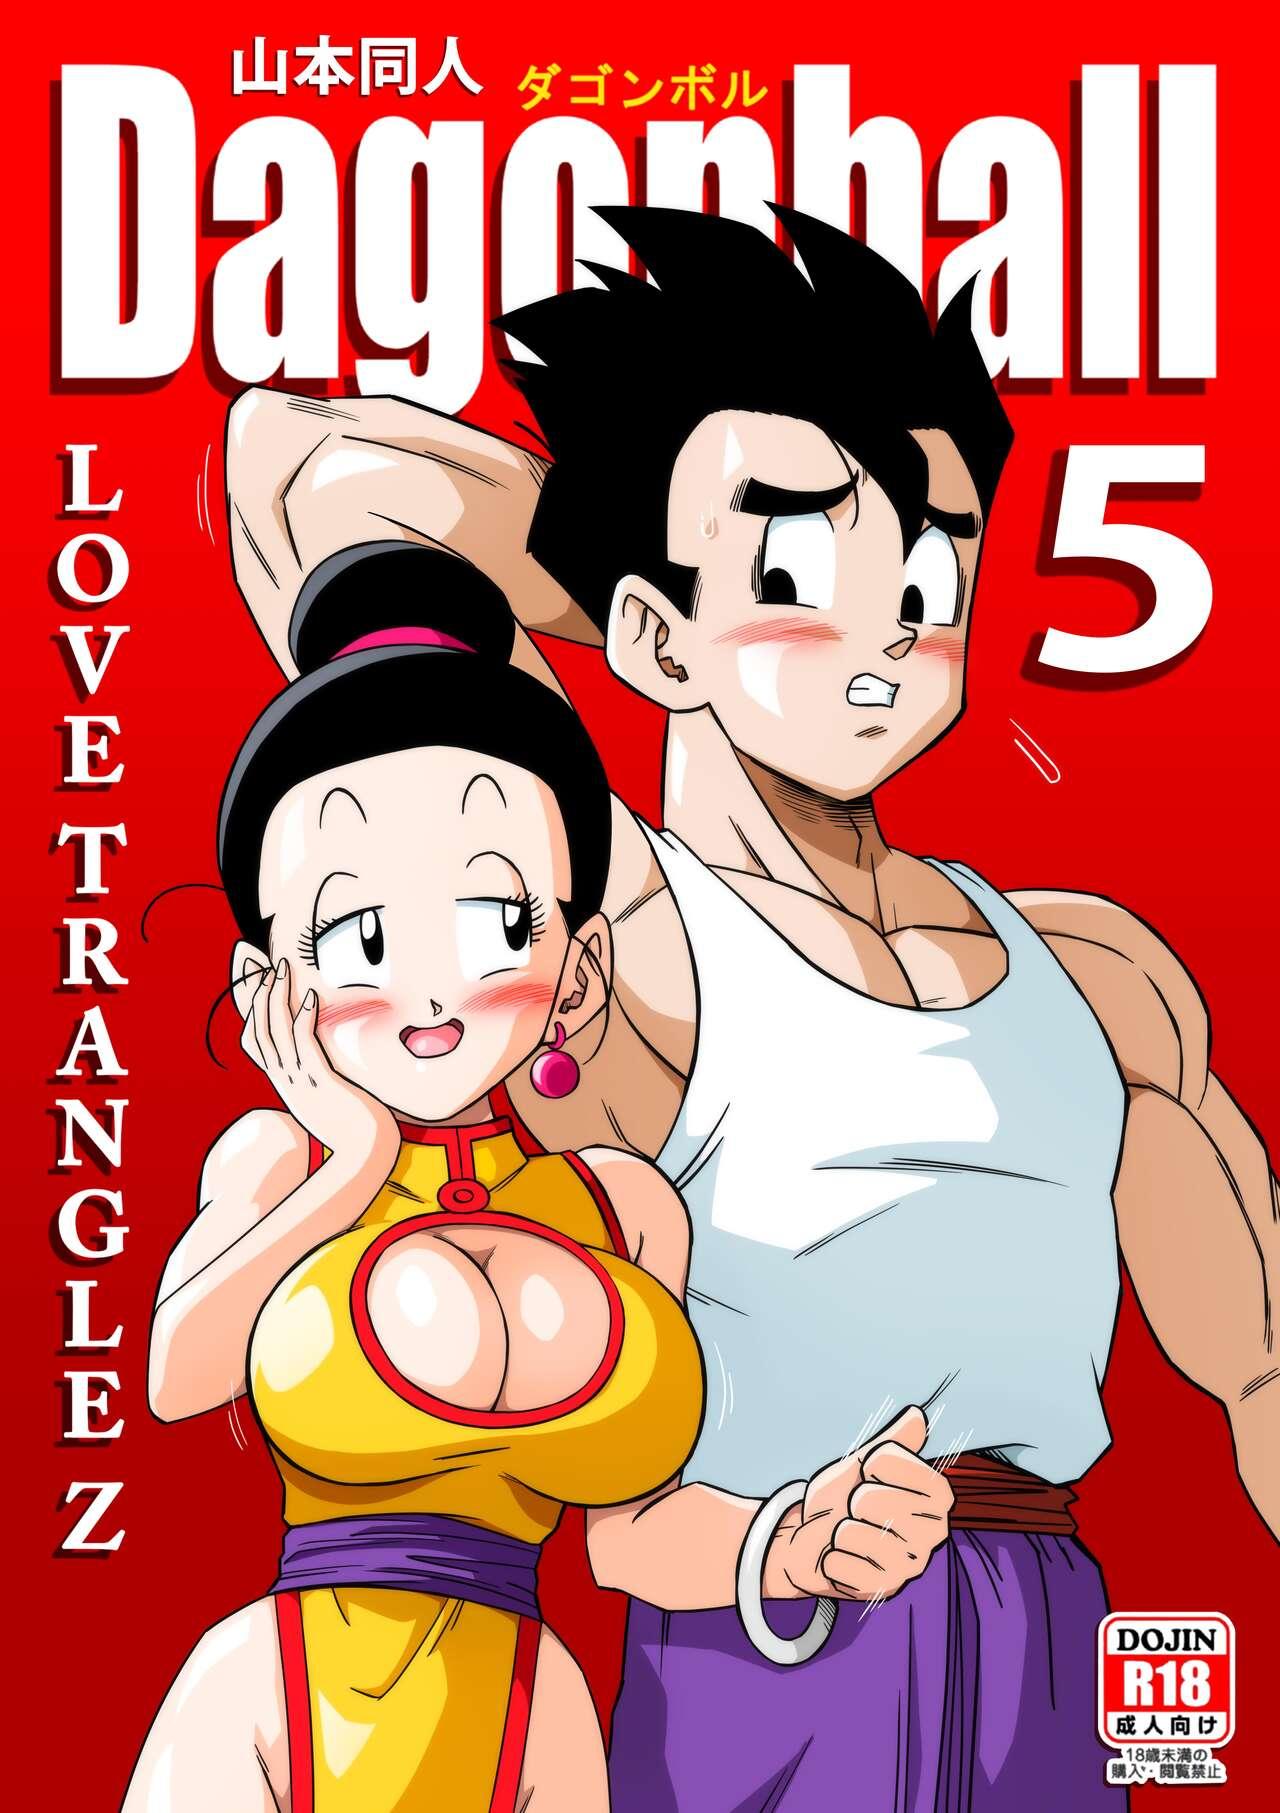 Girl LOVE TRIANGLE Z PART 5 - Dragon ball z Oiled - Picture 1